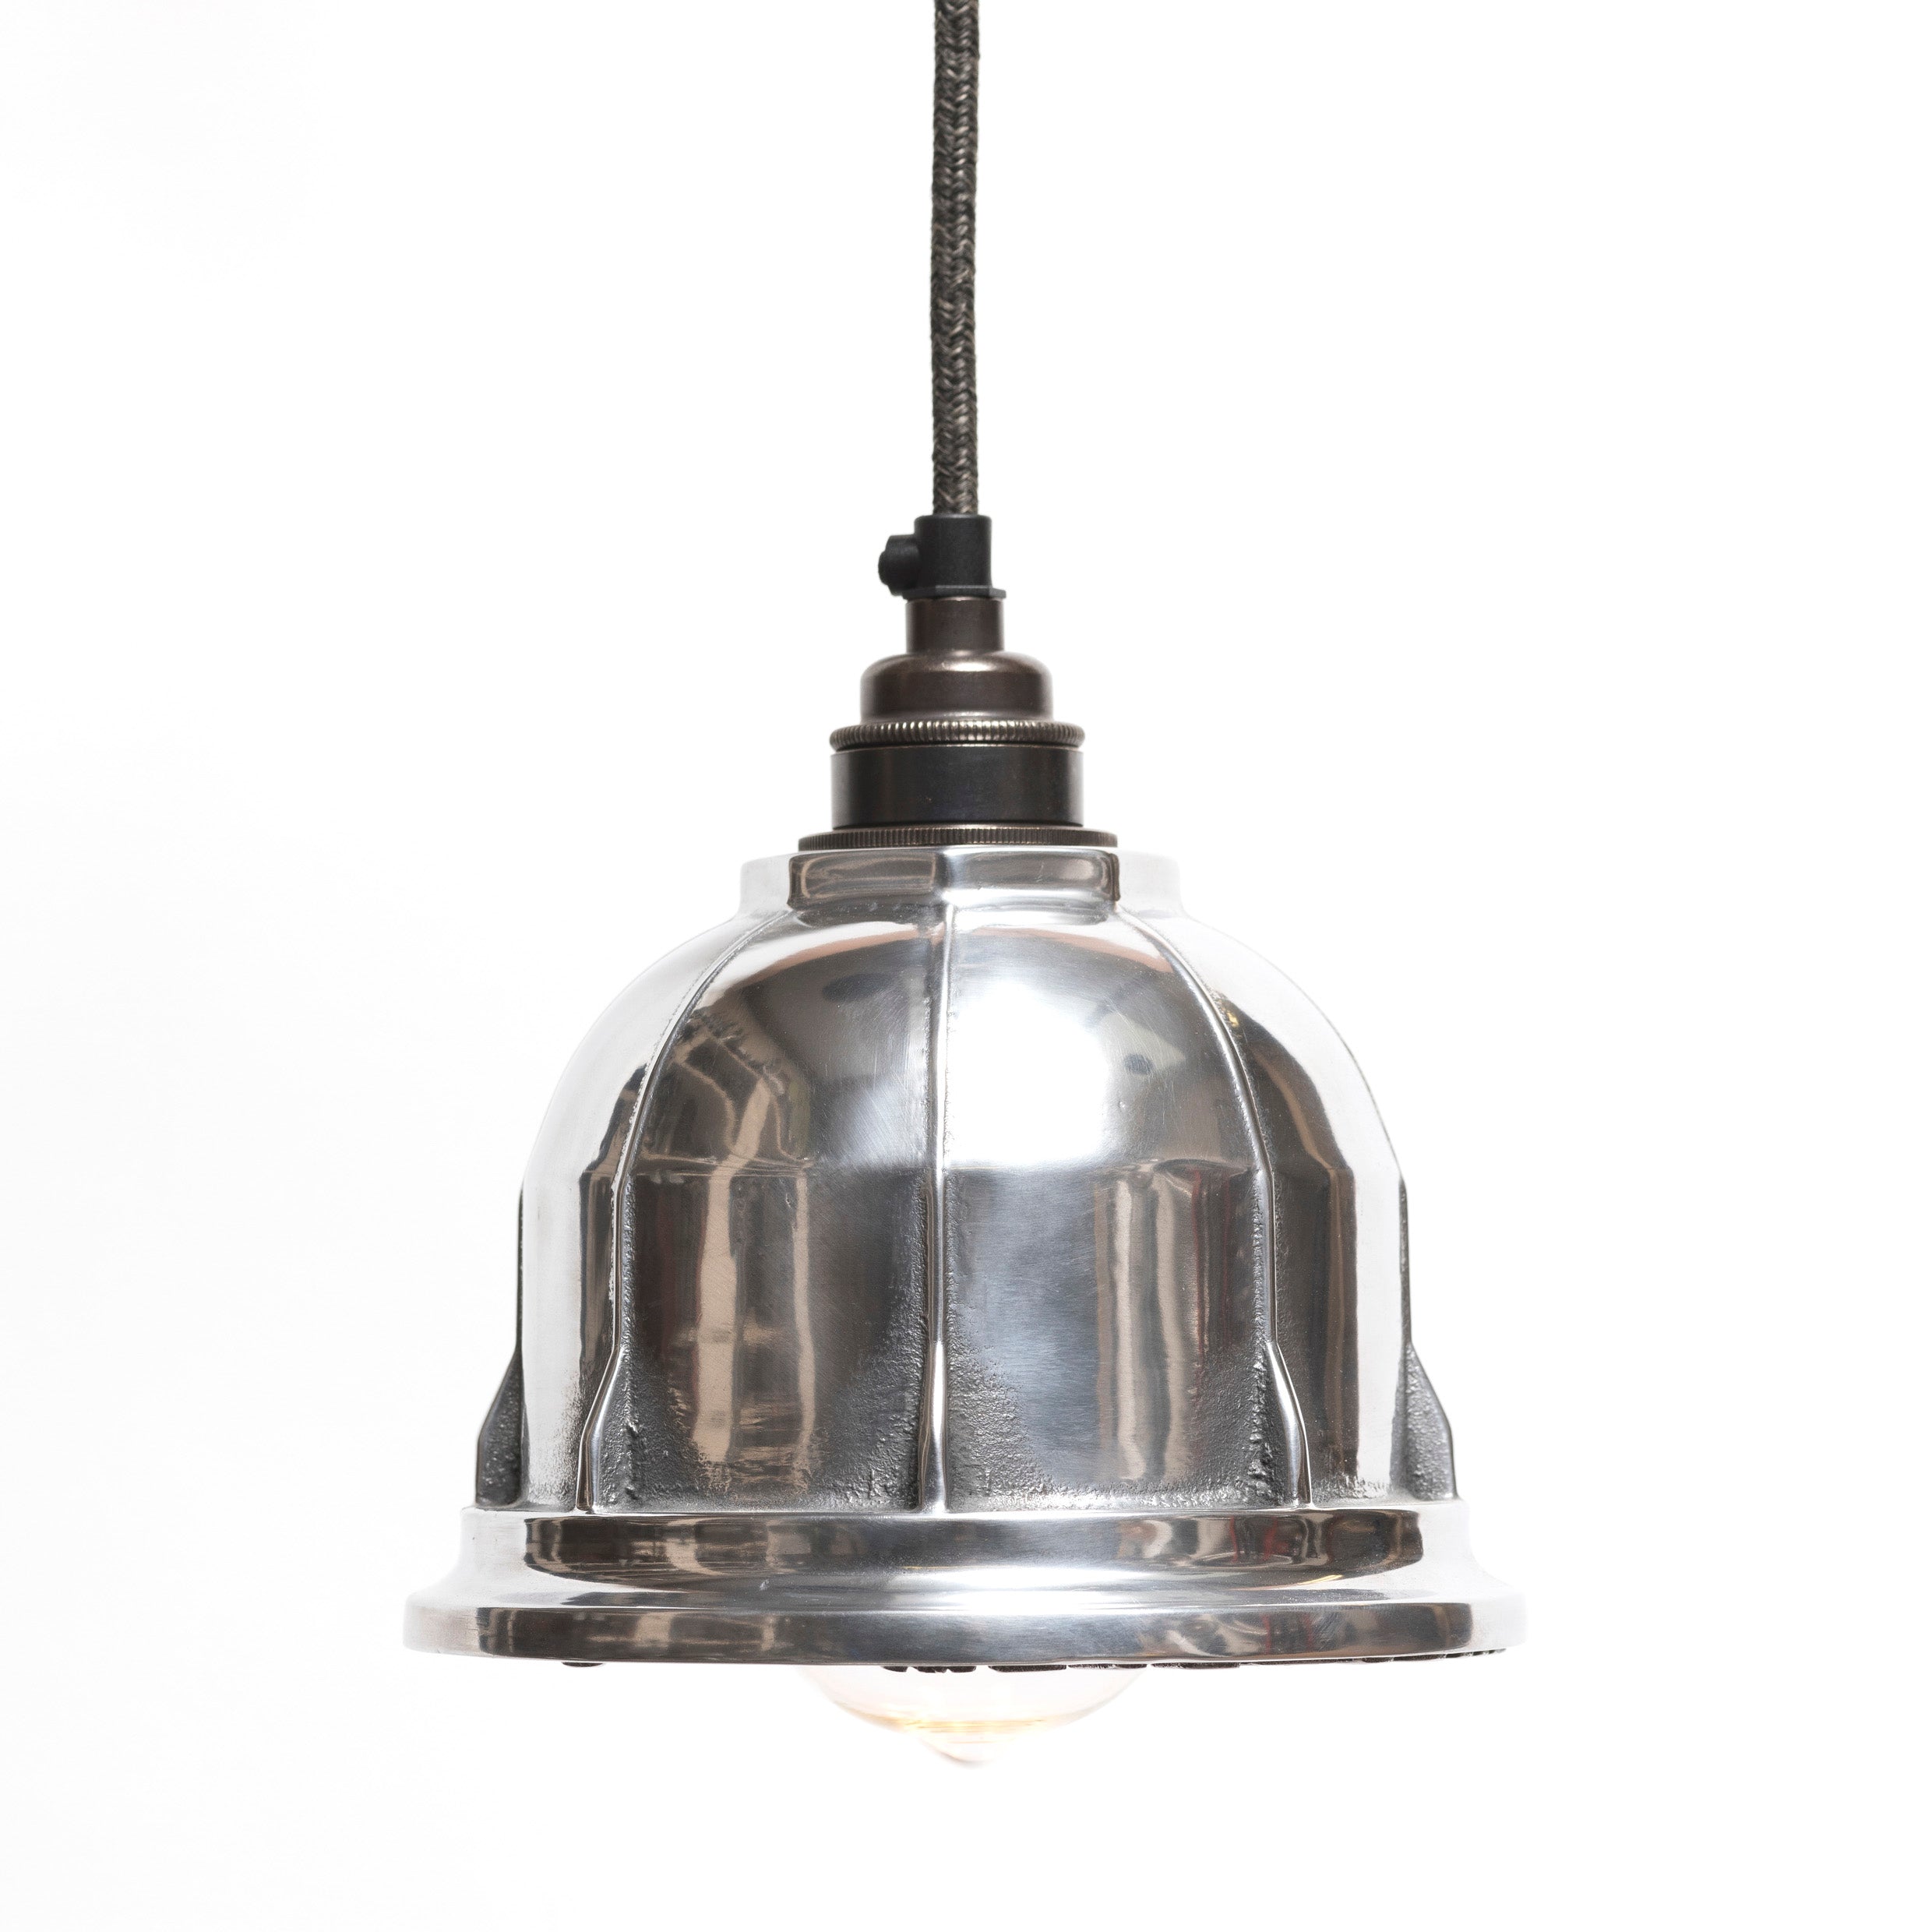 The Rag & Bone Man hand polished Pattern #3 Meter pendant lamp from Warehouse Home